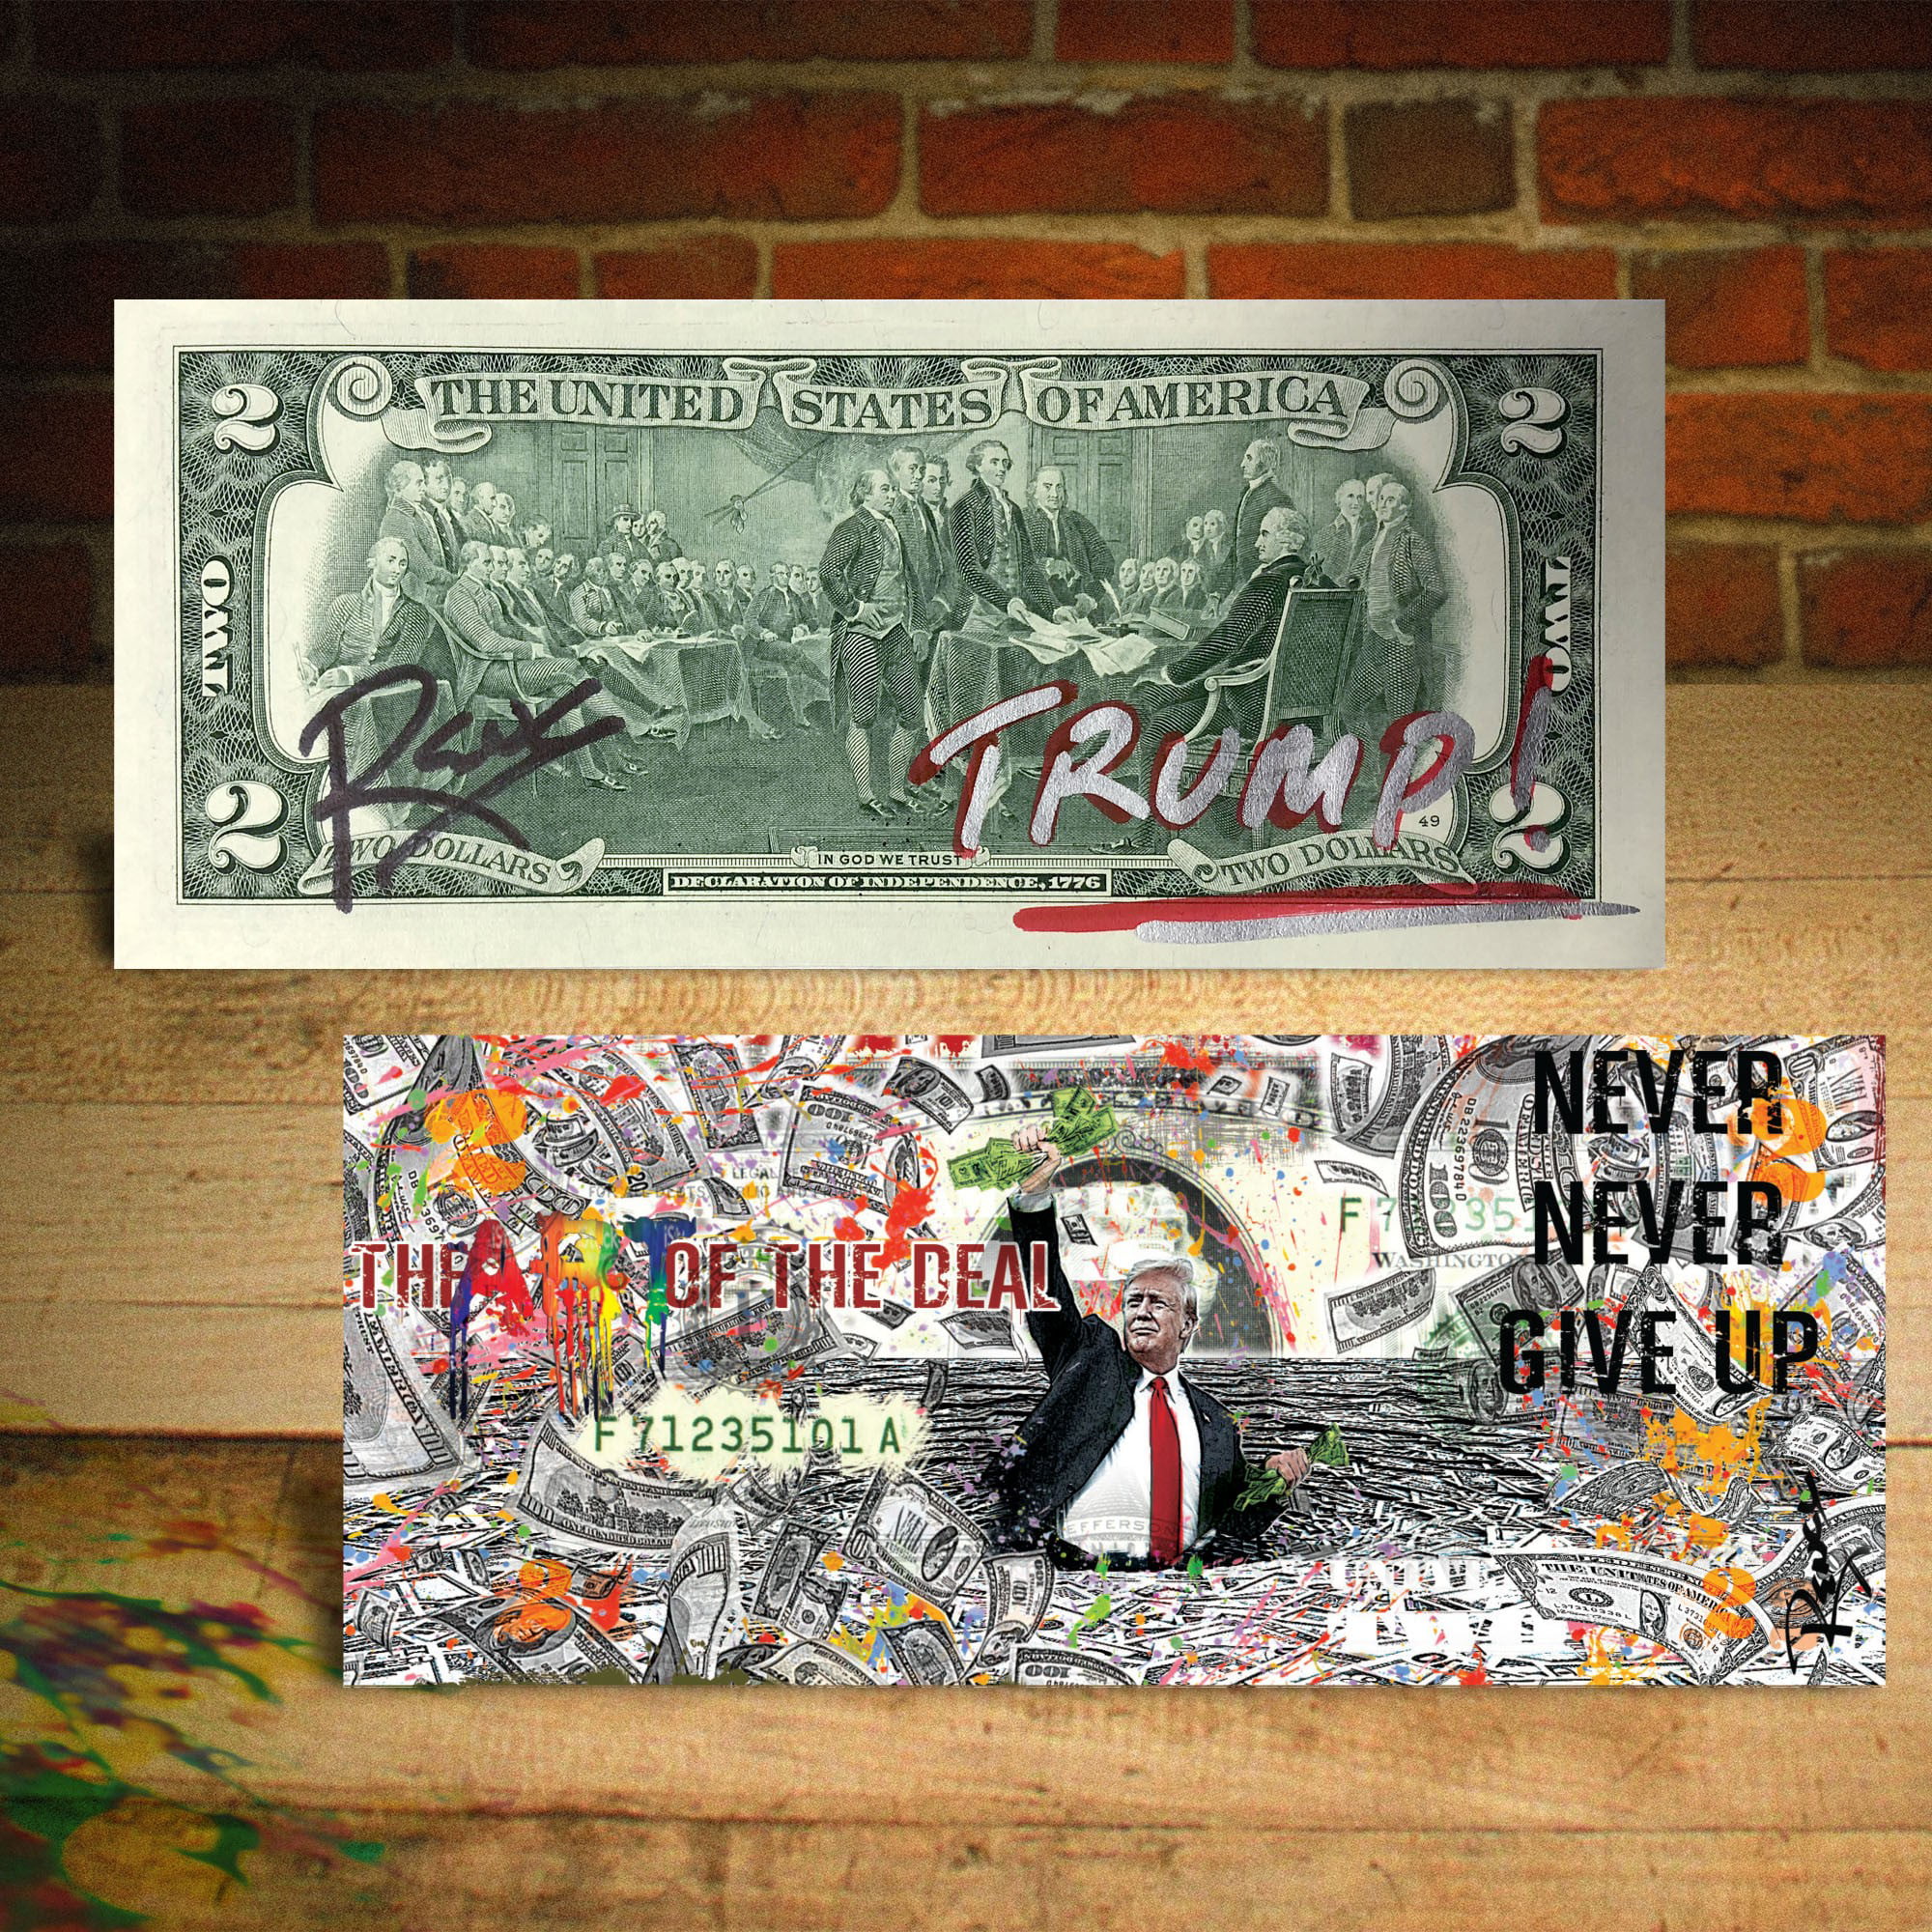 WONDER WOMAN For President DC COMICS Genuine $2 Bill SIGNED by Rency ART Banksy